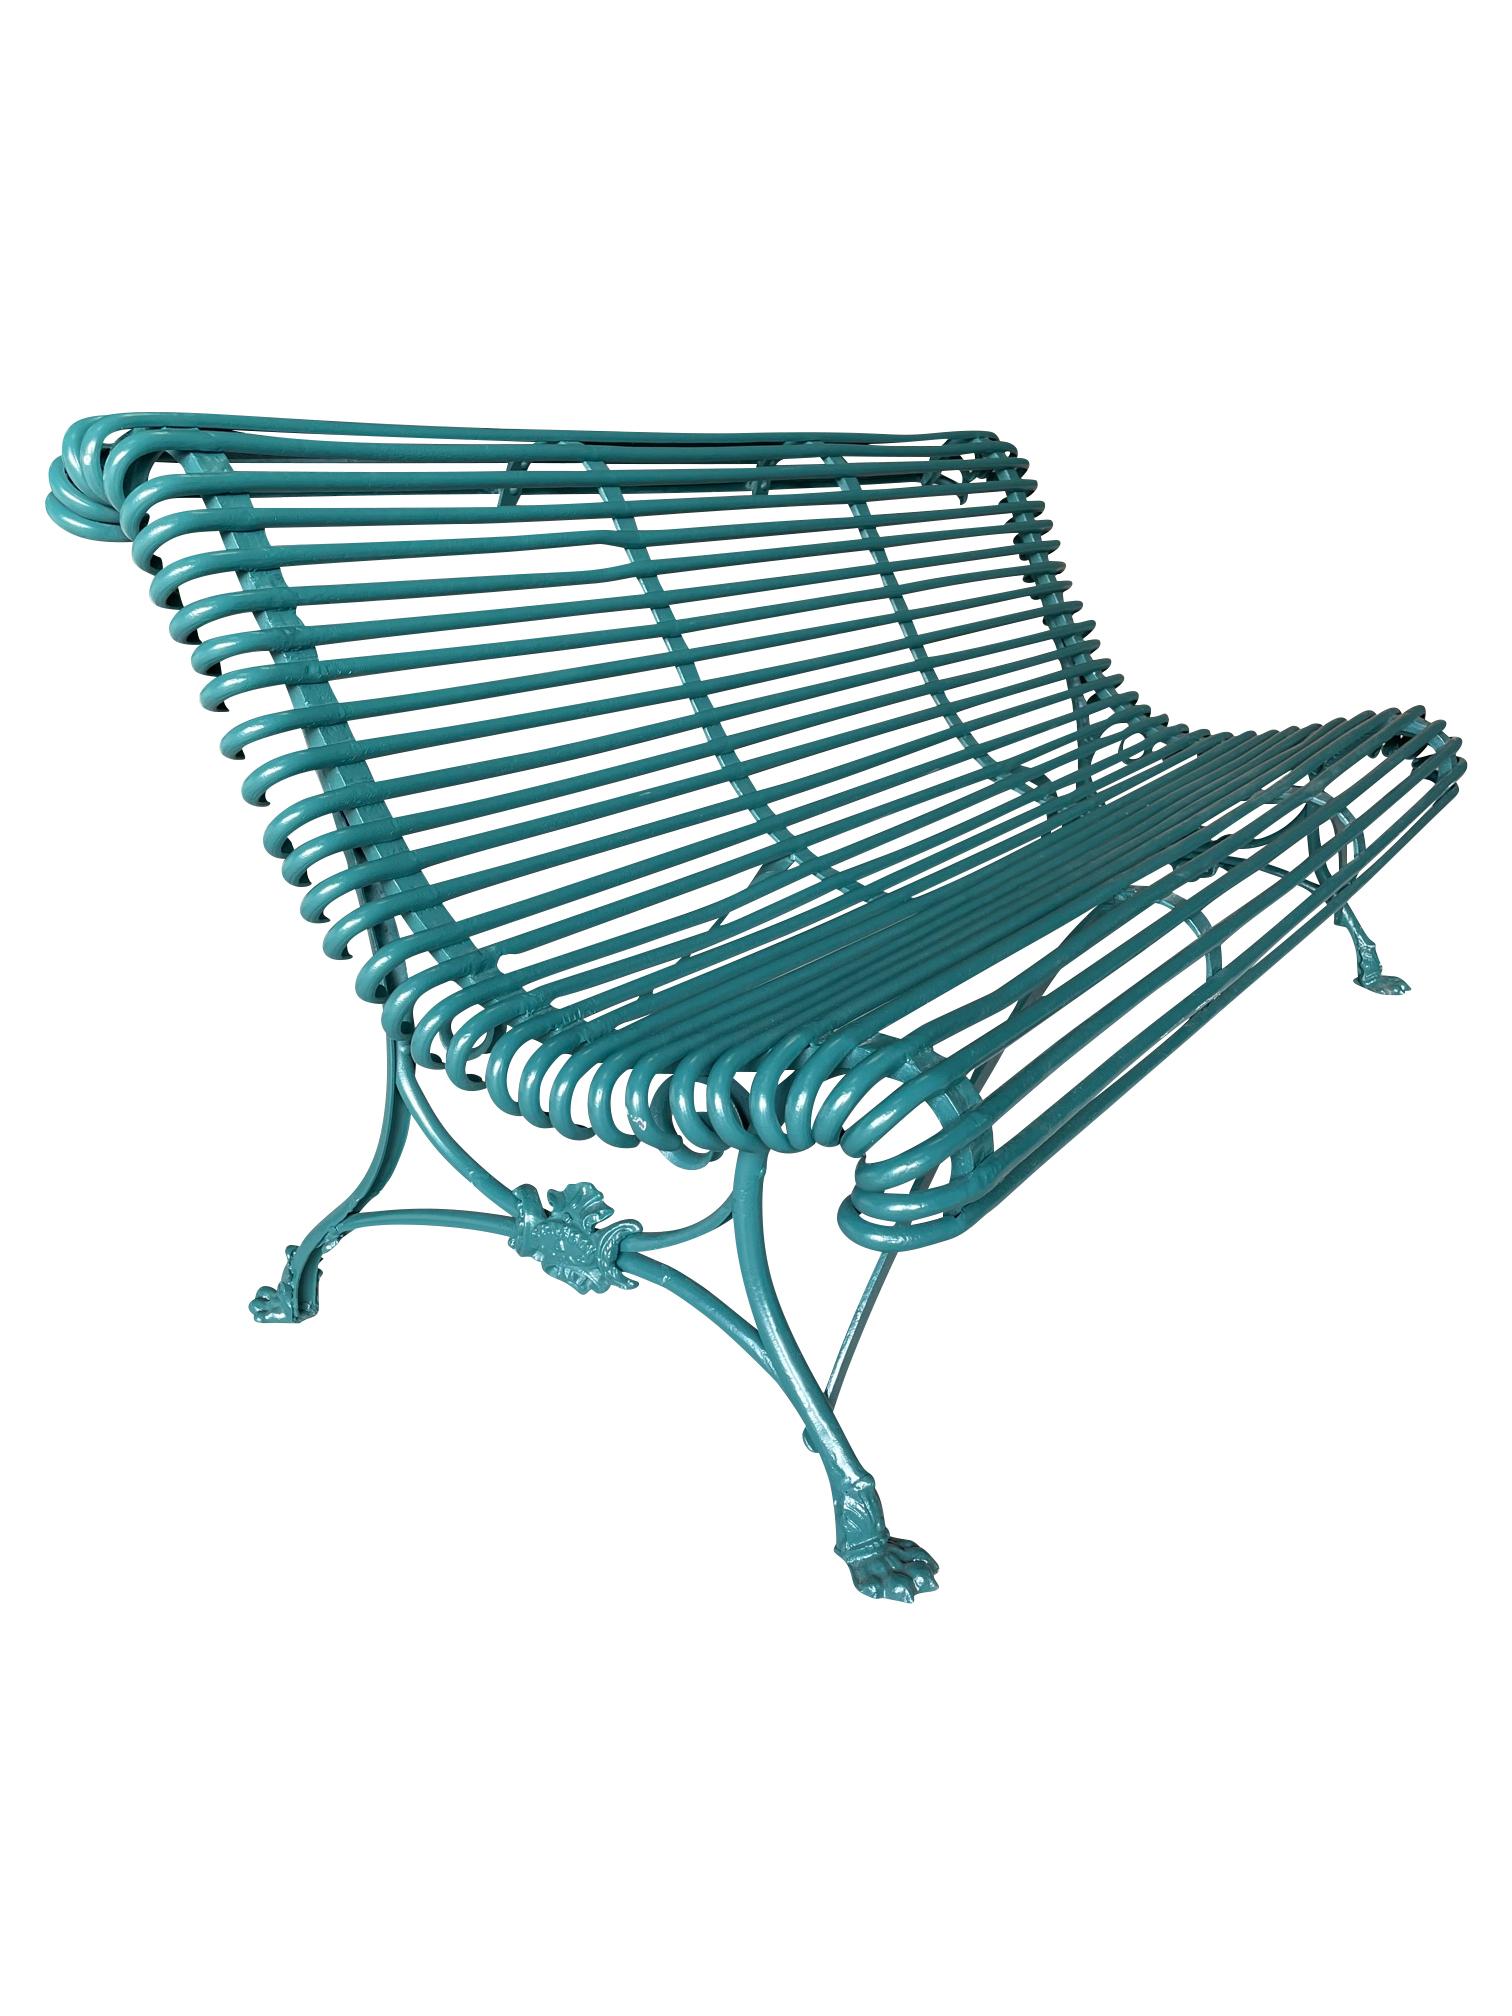 An early Arras wrought iron garden bench. The earlier lions feet date the table to from the 1850’s. Pre-1900 Arras Furniture has claw feet and post-1900, the design of the feet changed to hoof feet. The factory was located in the Northern French